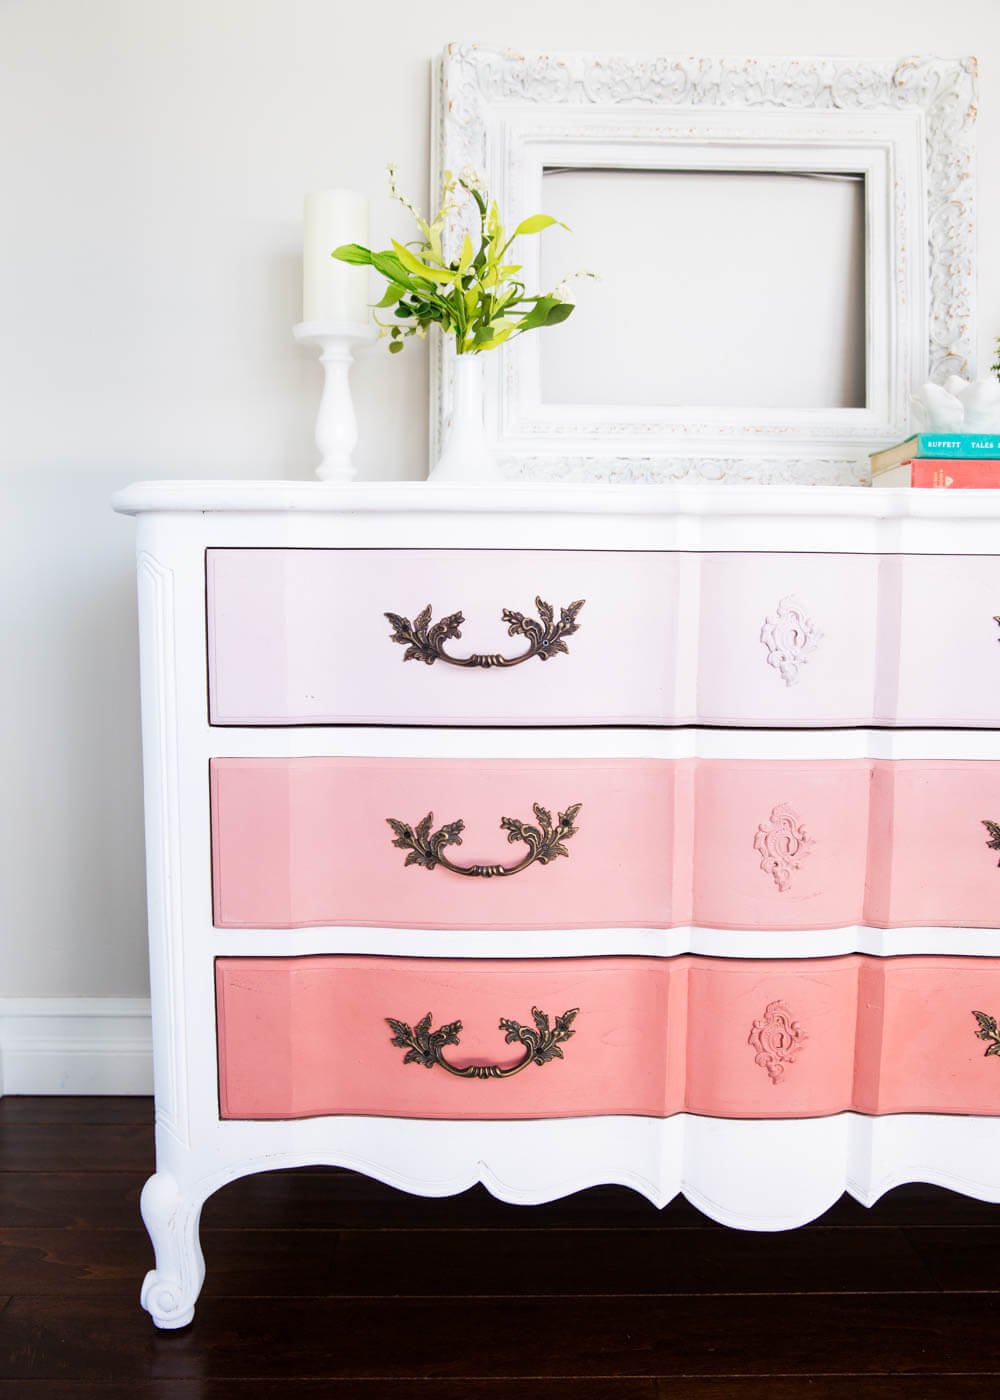 The easiest tutorial on how to paint furniture ...creating a DIY ombre dresser. Just 4 easy steps to creating this look. 